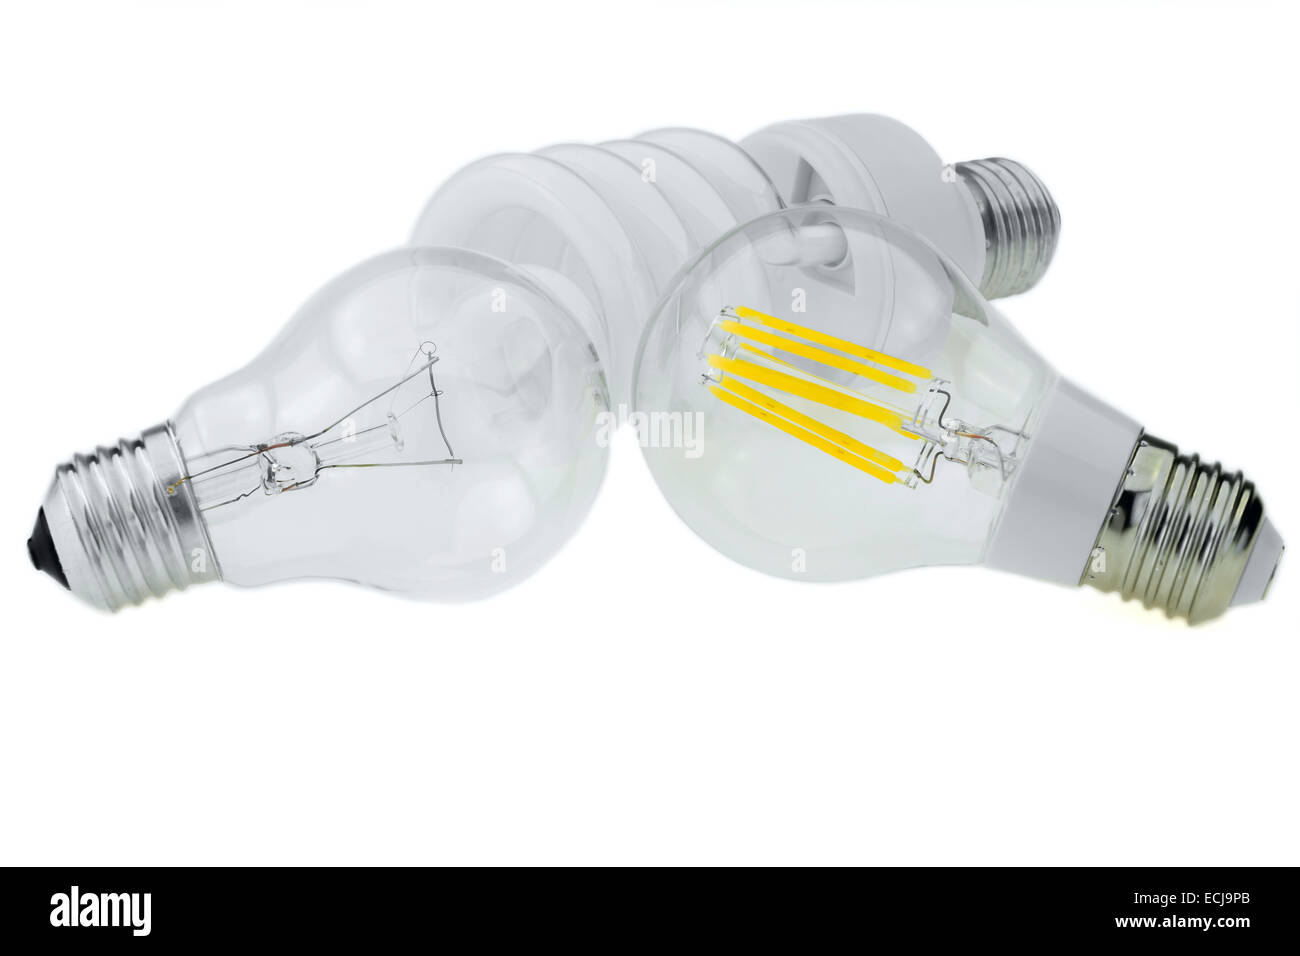 Led Lamp High Resolution Stock Photography and Images - Alamy